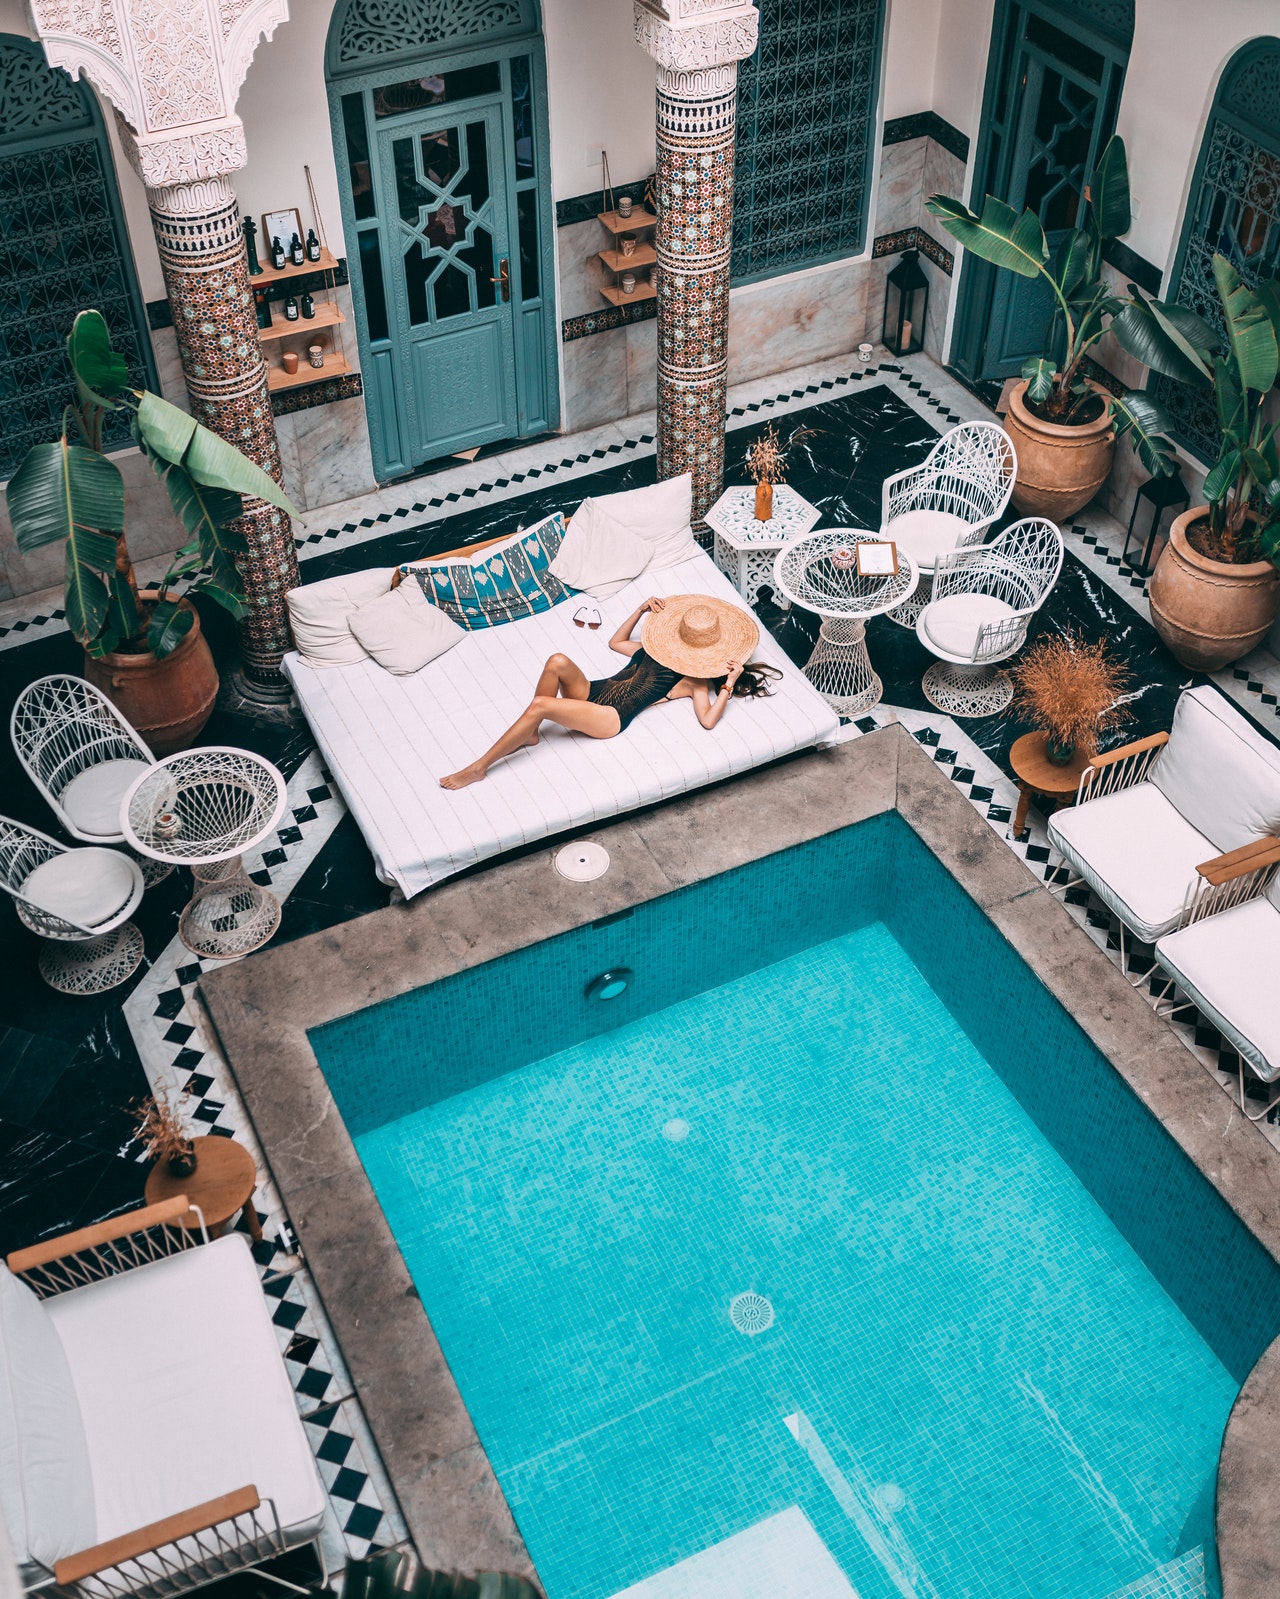 A pool inside a house with a woman sleeping on the side